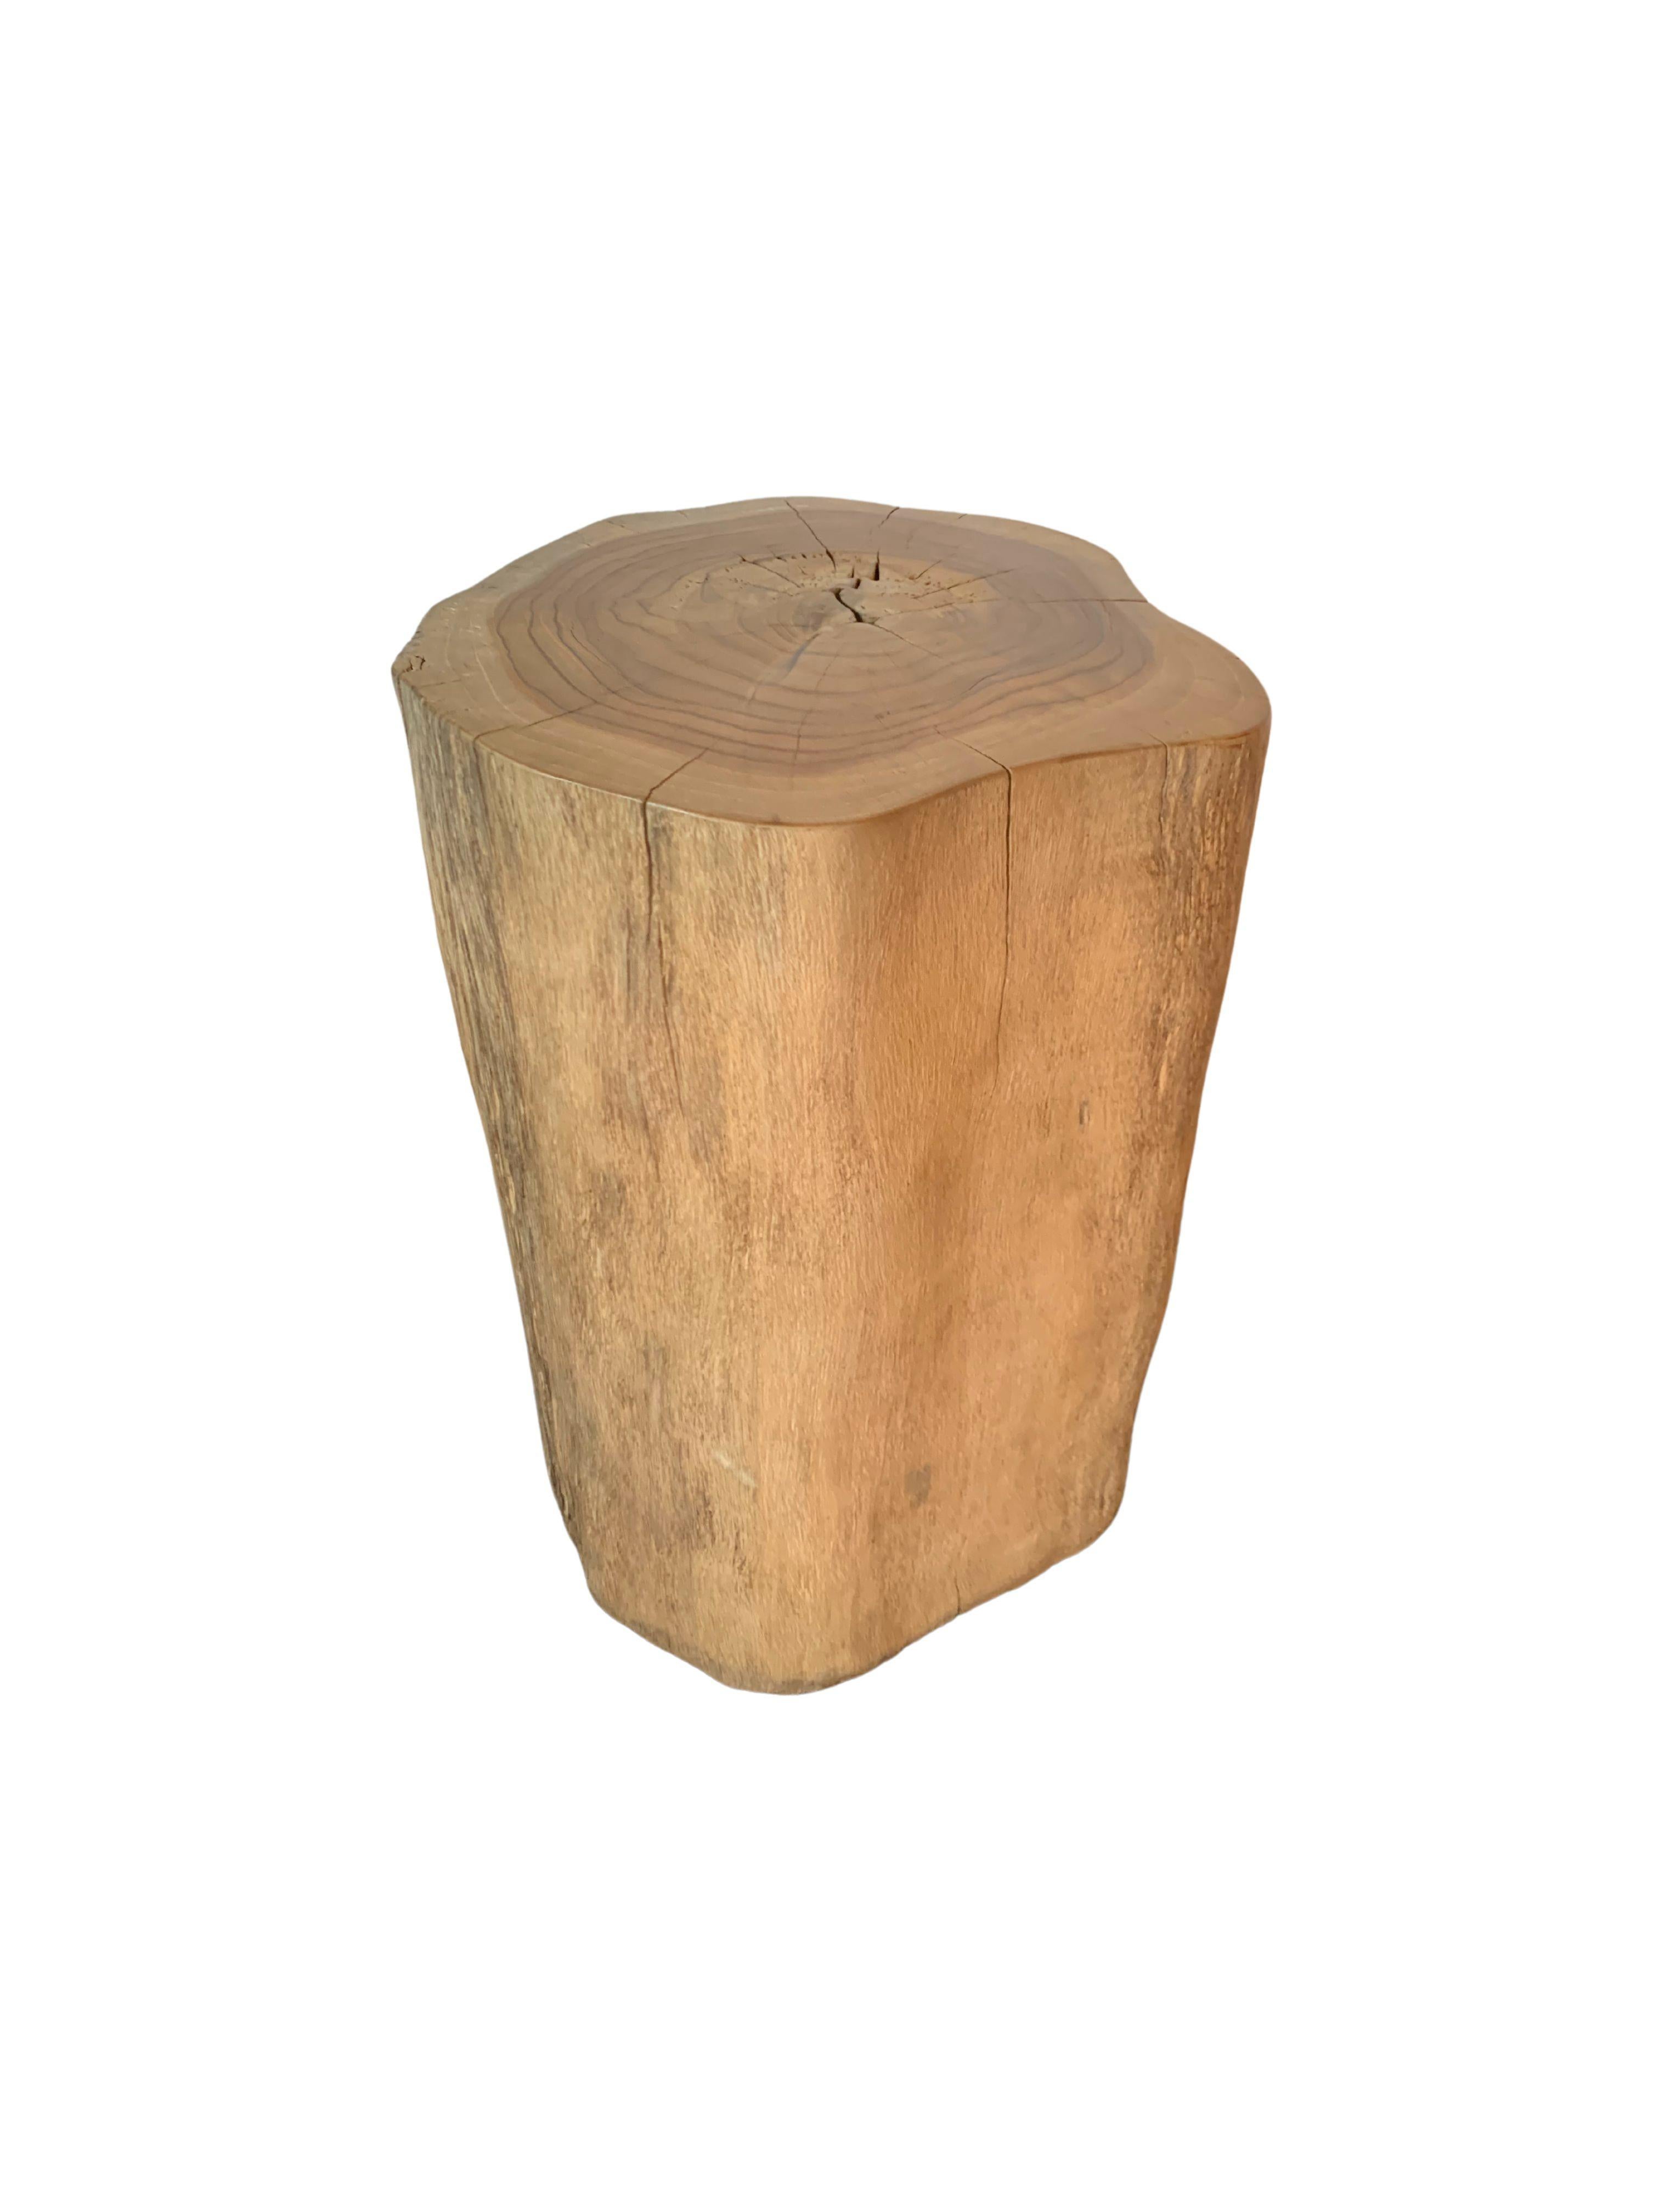 Tree Trunk Side Table Solid Teak Wood Natural Finish Modern Organic In Good Condition For Sale In Jimbaran, Bali